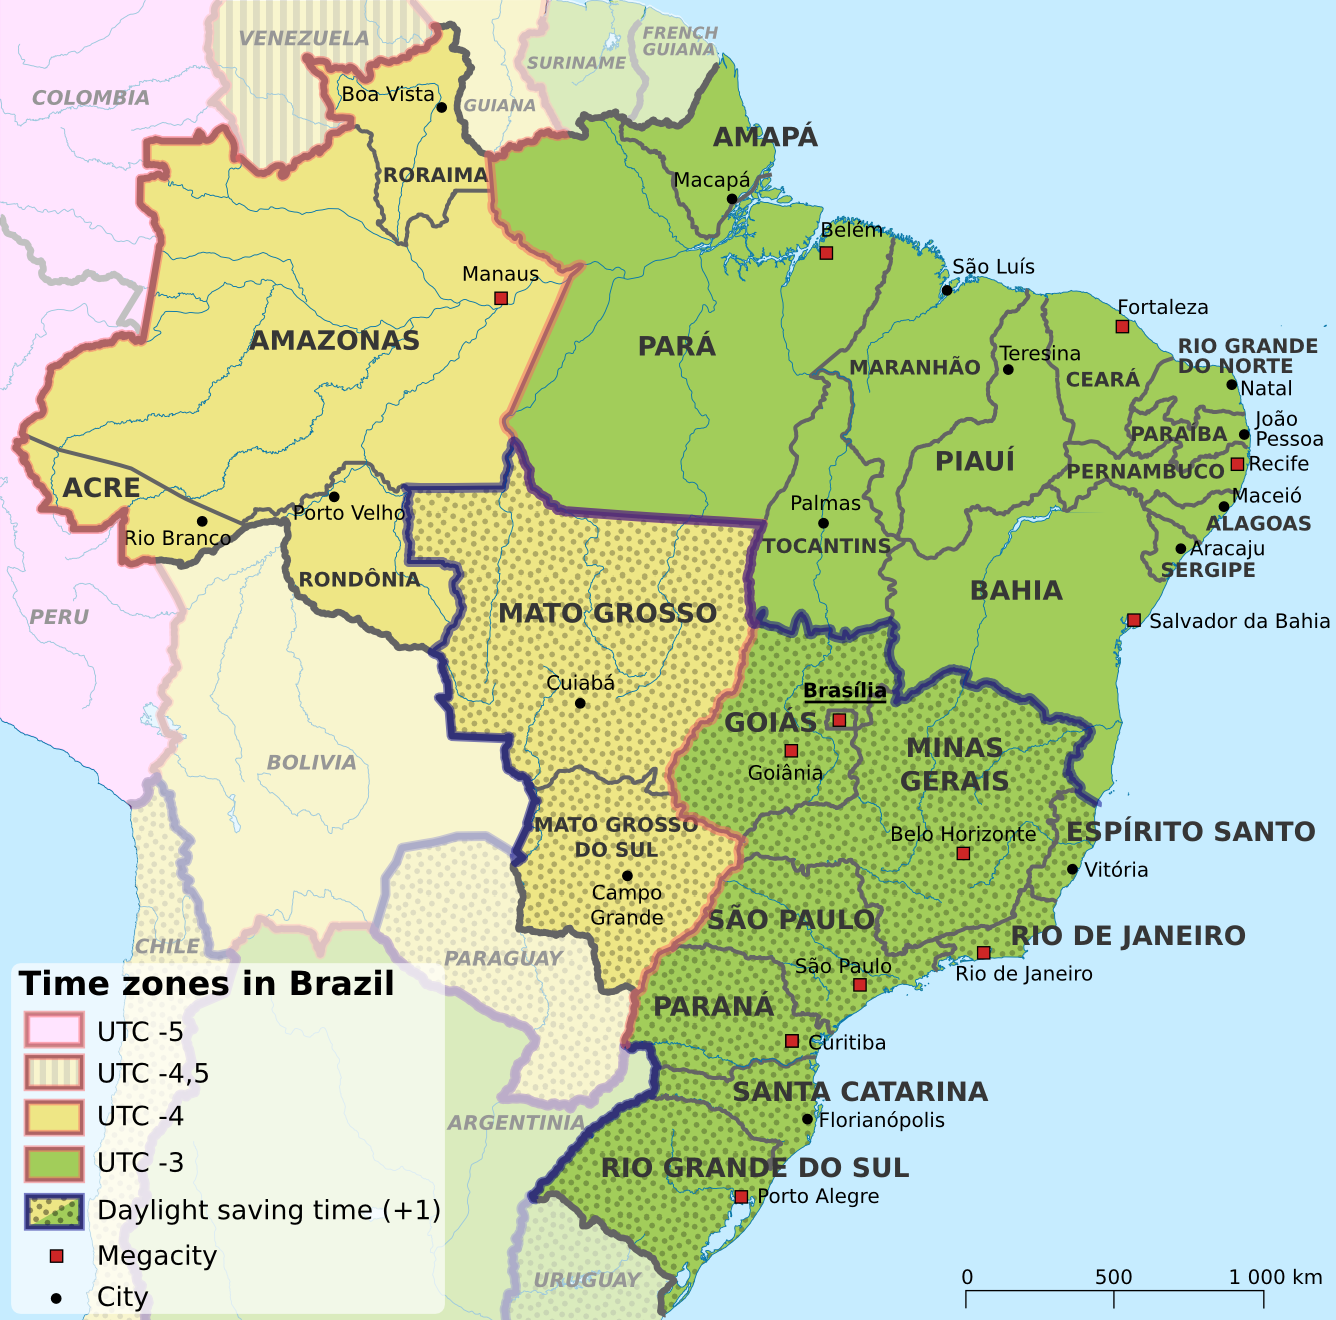 File:Time zones in Brazil-en.png - Wikimedia Commons sao paulo time zone to est